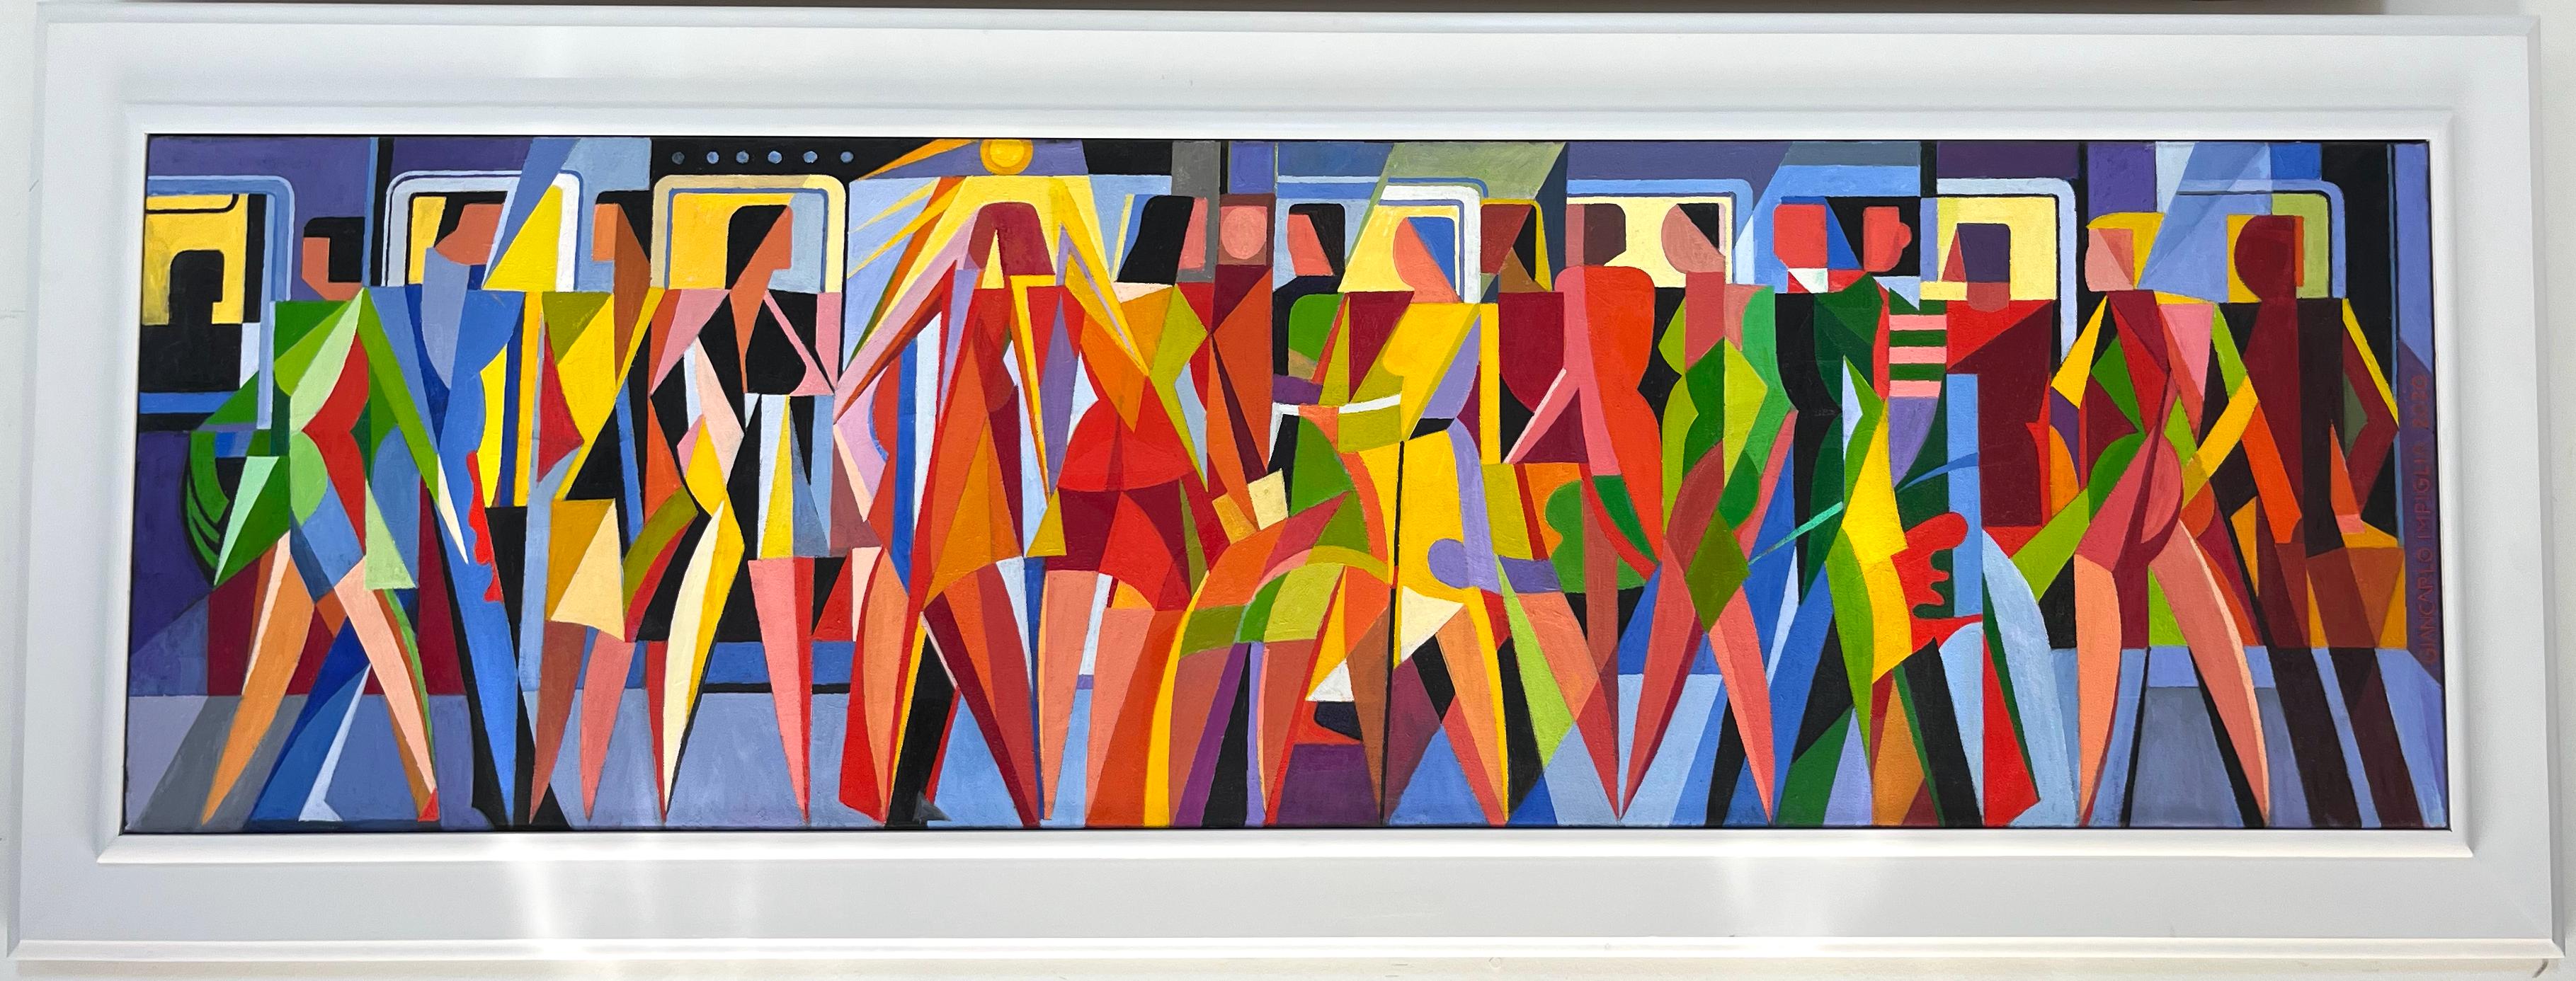 A beautiful, original work by the indelible Giancarlo Impiglia. 

Born in Rome, Impiglia moved to New York in the 70s, where he established a signature style on the shoulders of Futurism and Cubism, his technical skill underpinning his eclecticism